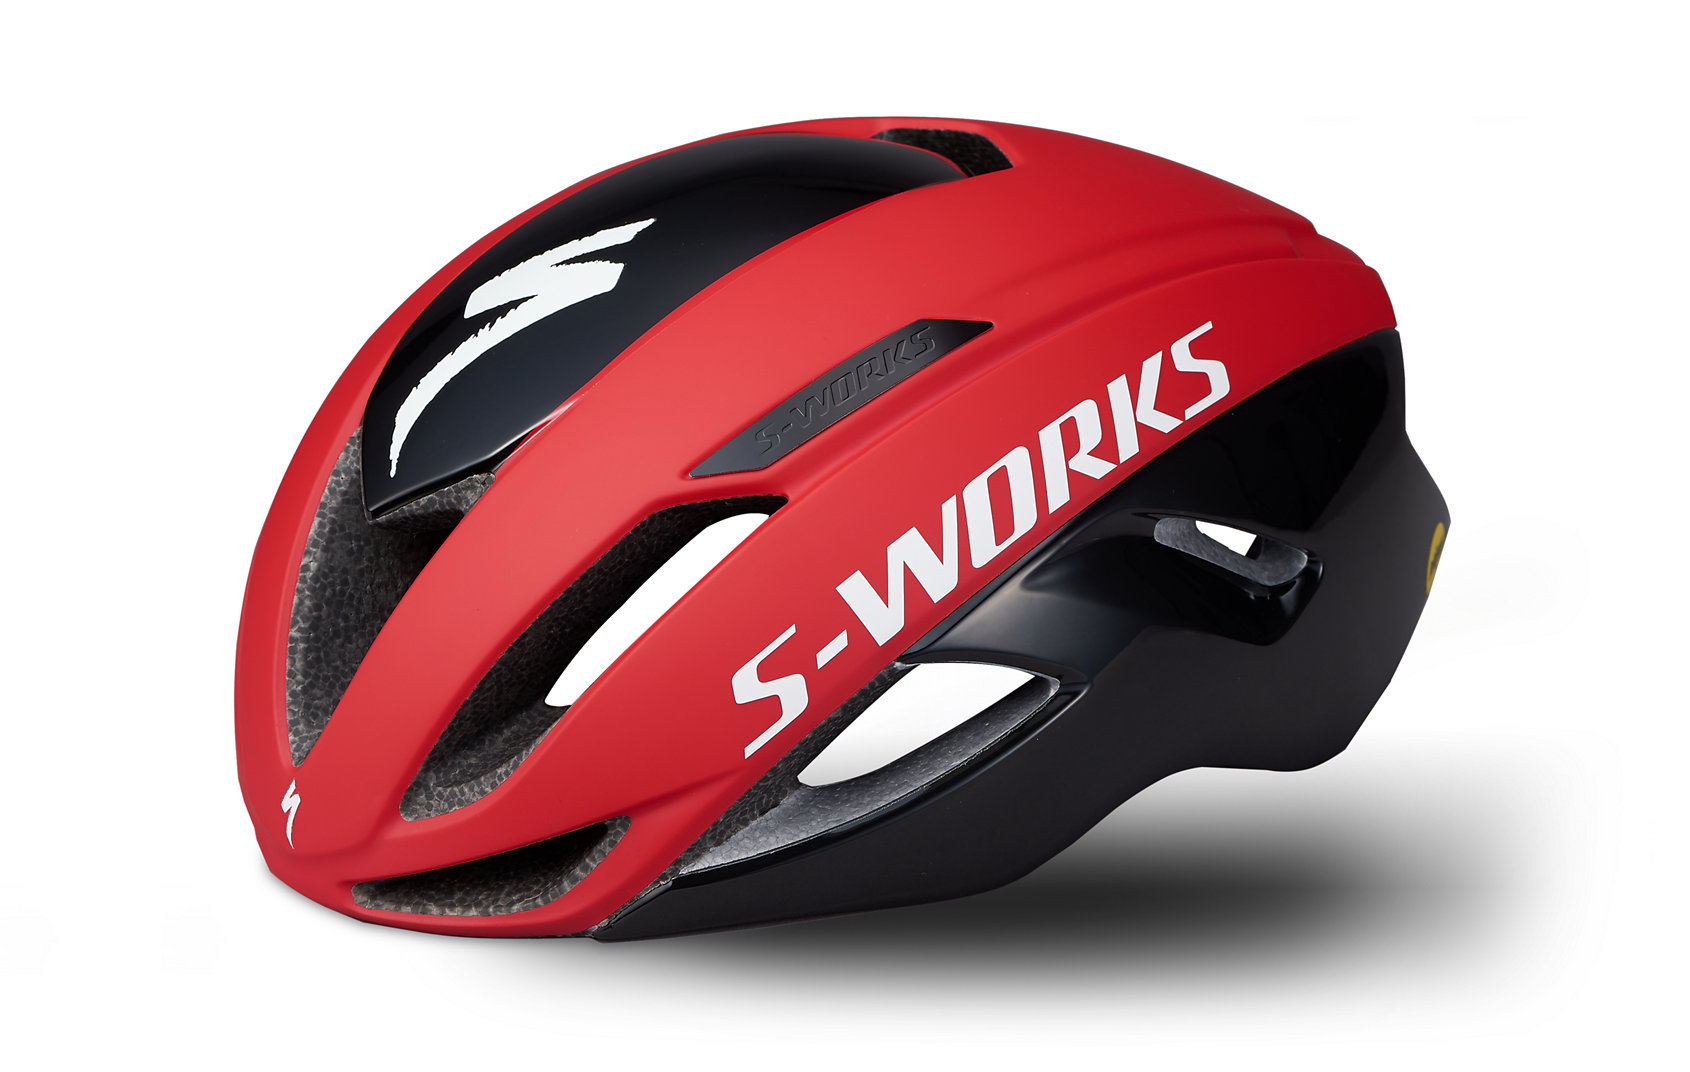 Helmet, Bicycle helmet, Clothing, White, Personal protective equipment, Bicycles--Equipment and supplies, Red, Motorcycle helmet, Sports gear, Motorcycle accessories, 